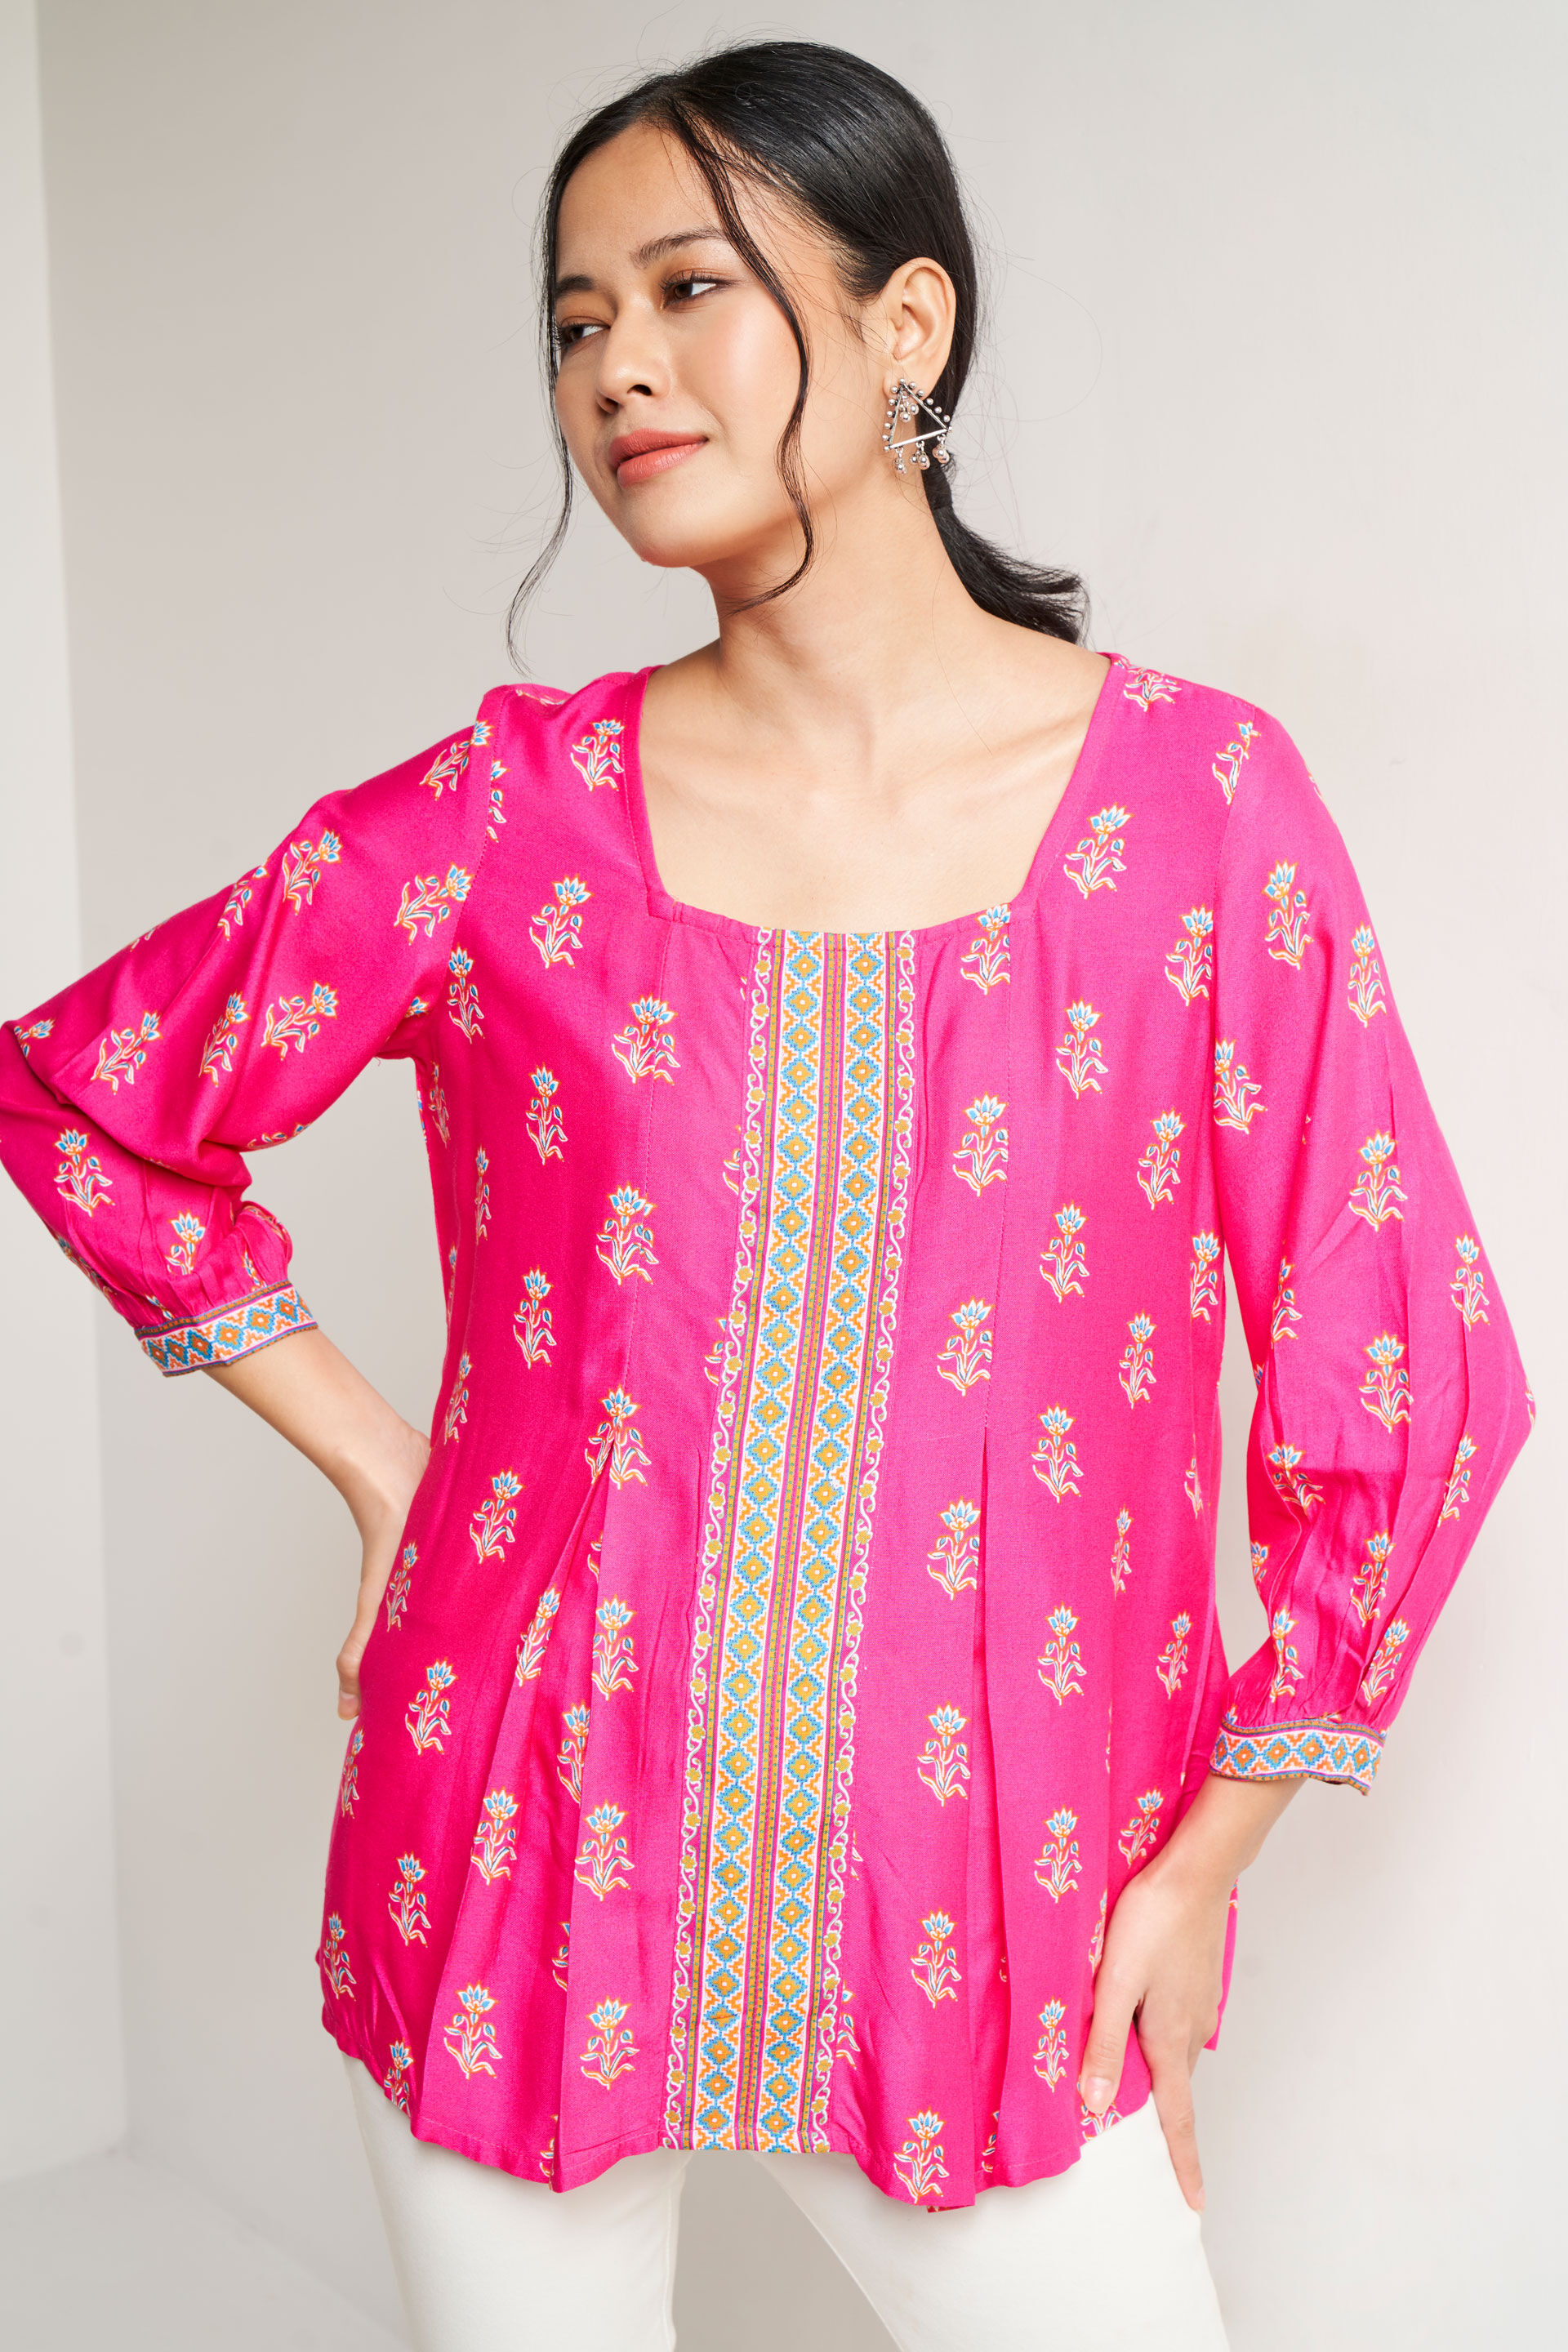 Peach Pleated Kurti With Peplum Blouse Adorned In Kasab Zardosi Embroidery  Online - Kalki Fashion | Party wear dresses, Stylish party dresses,  Designer party wear dresses